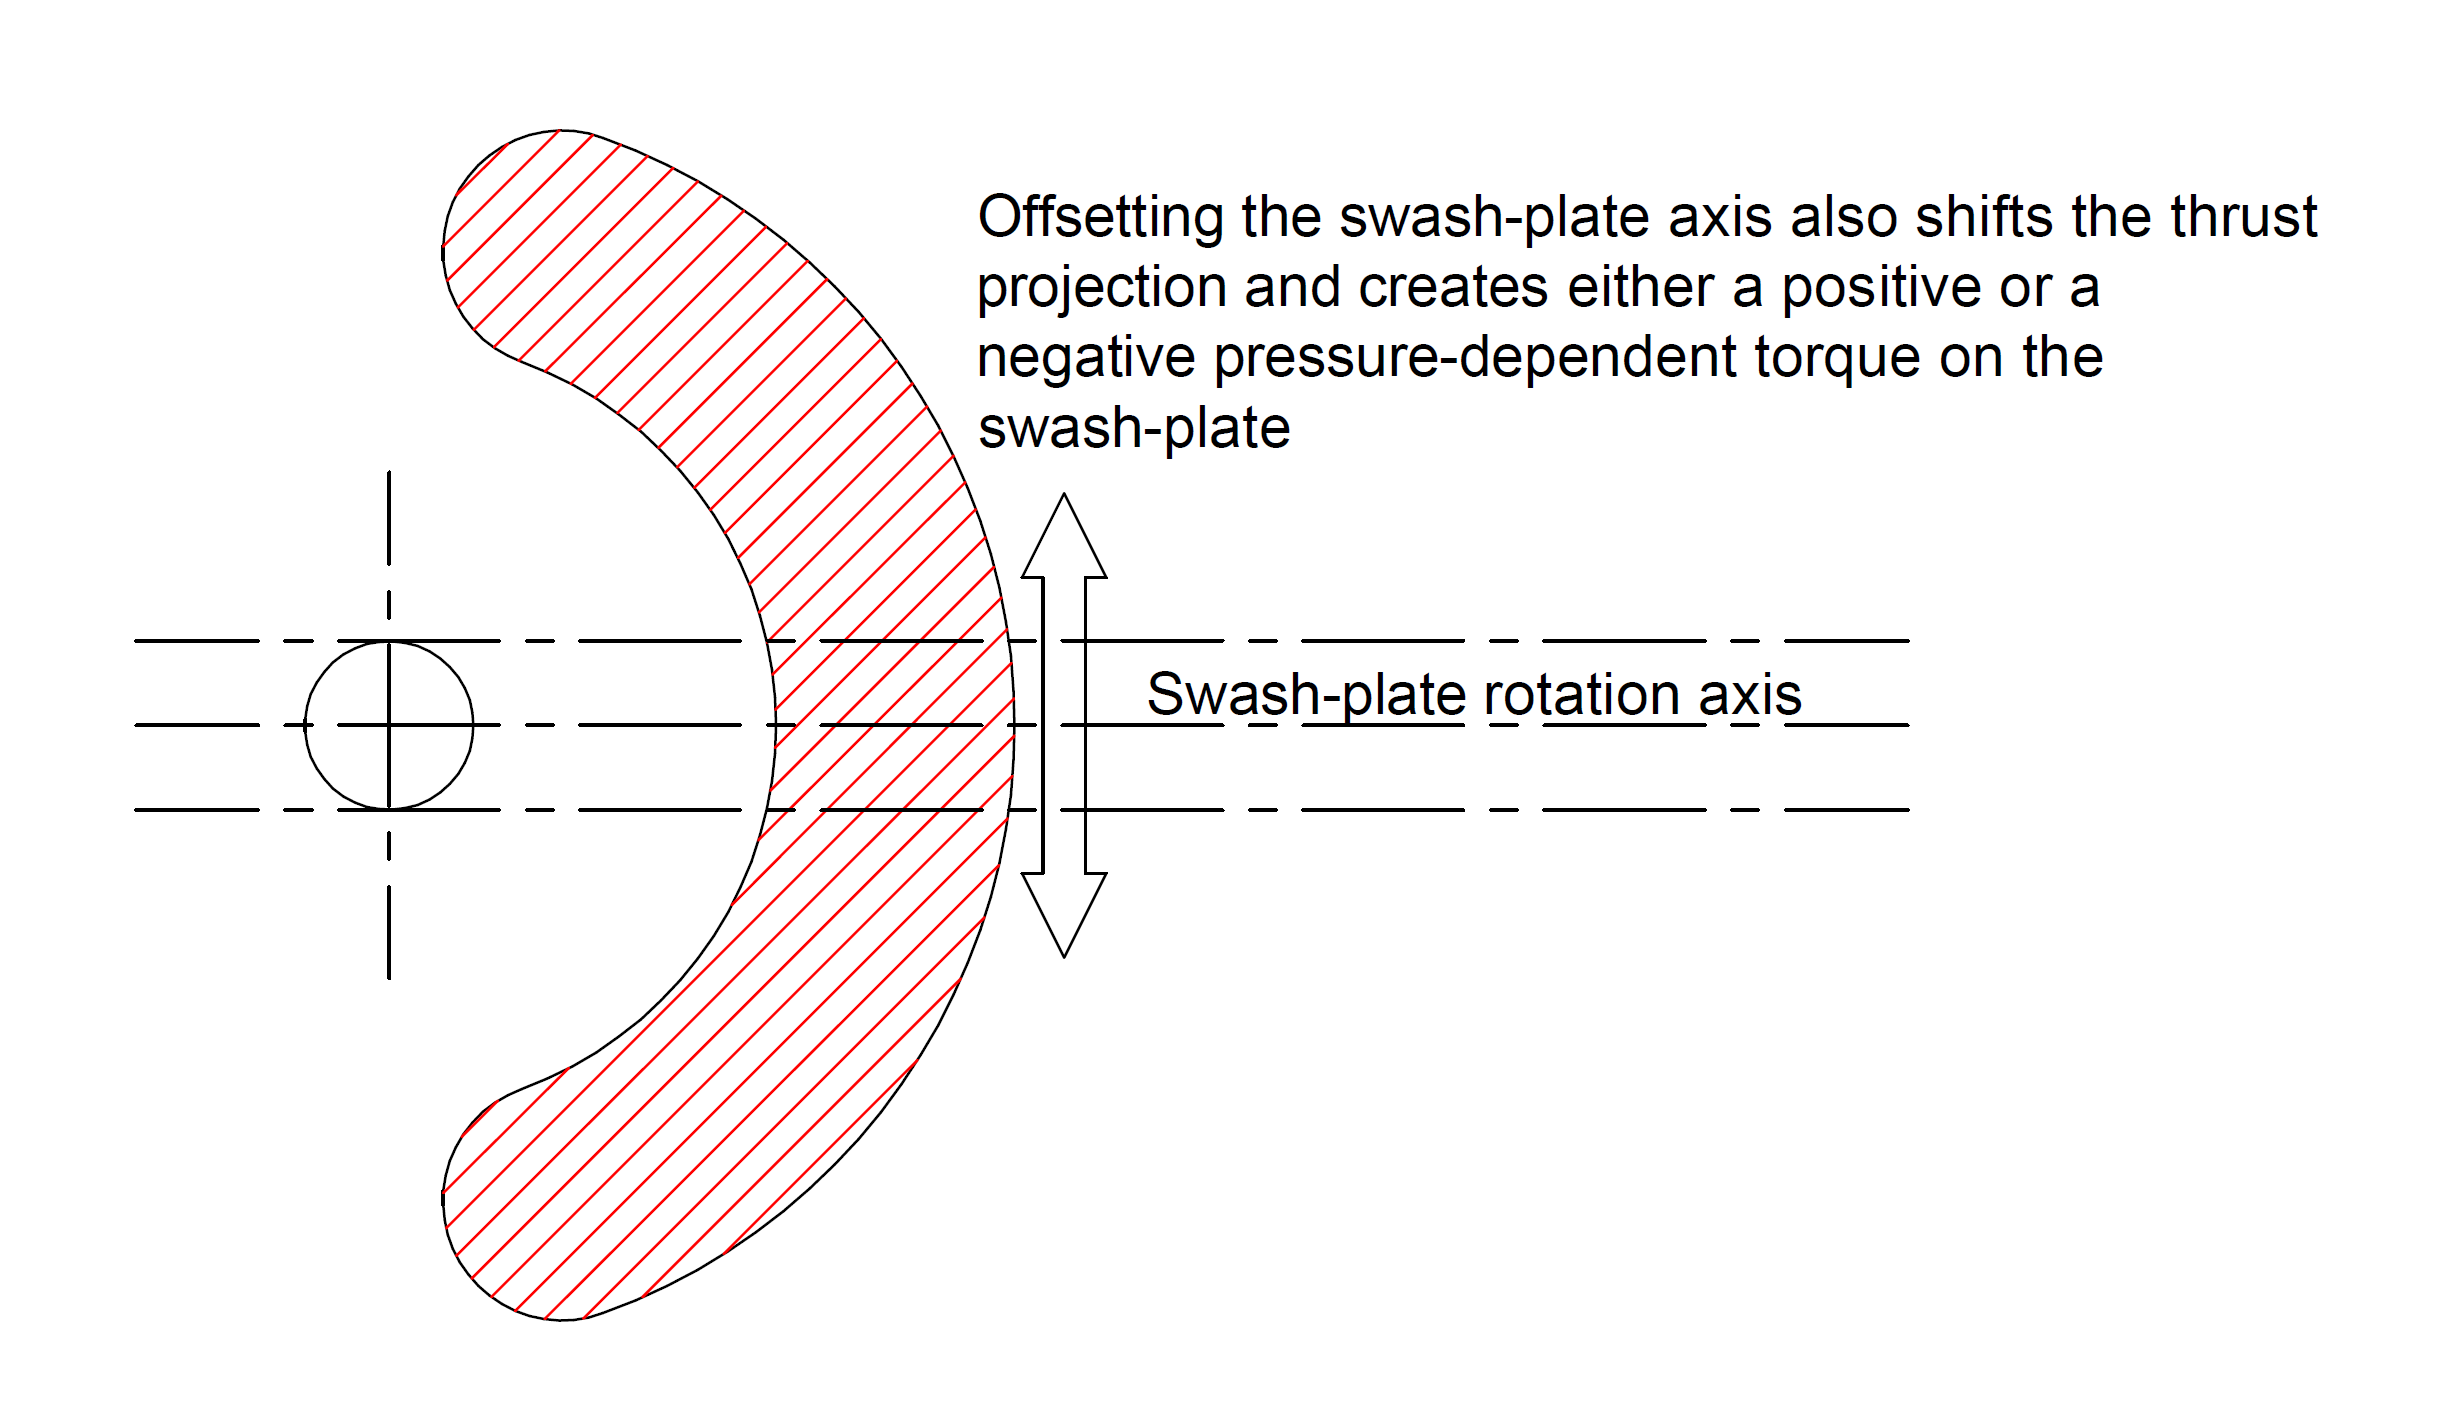 Offsetting the swashplate axis also affects its pressure-dependent torque